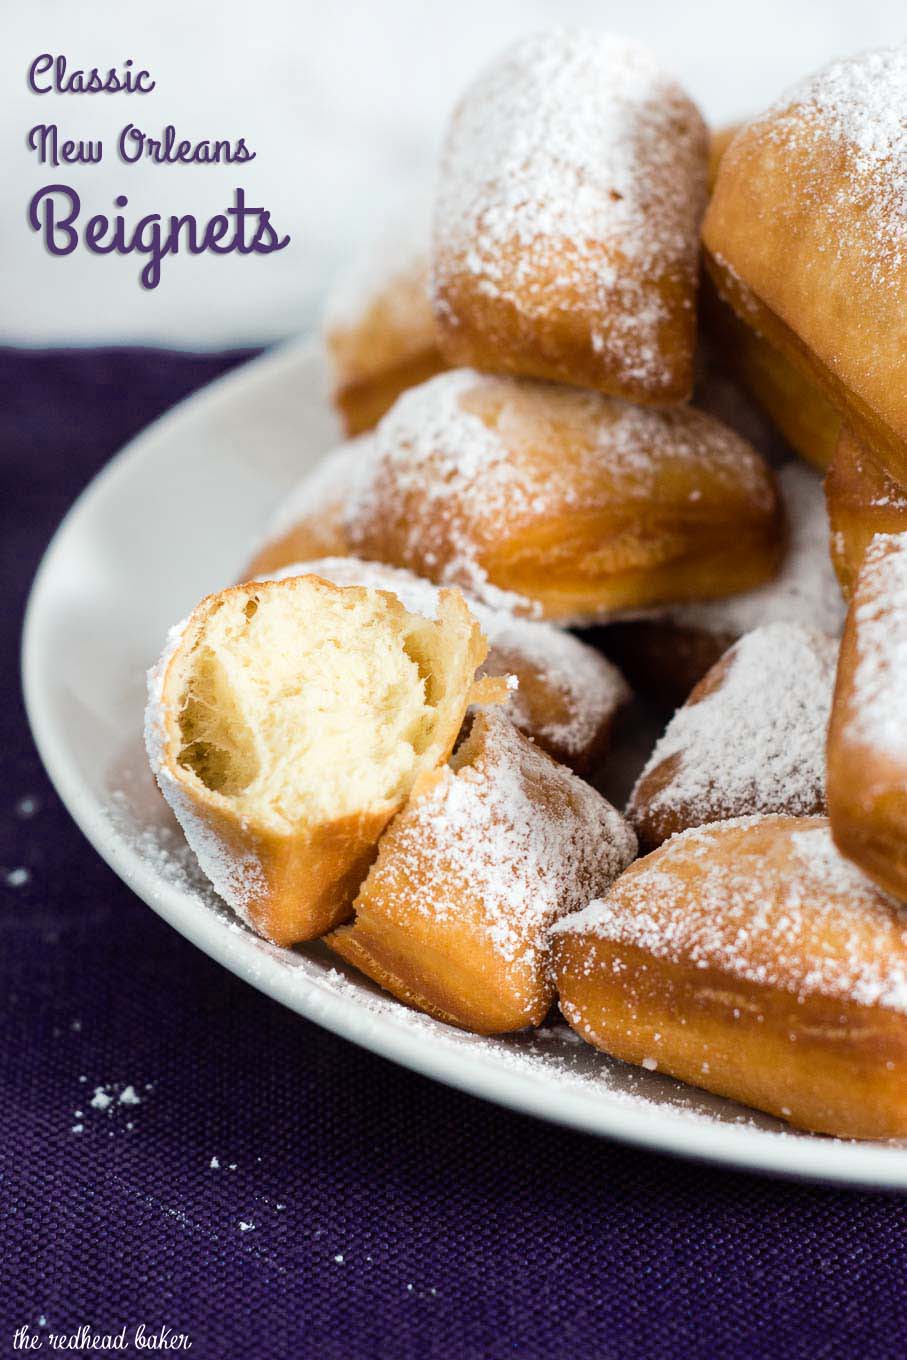 Mardi Gras means it's time for beignets! This is a classic New Orleans recipe, deep-fried then coated in powdered sugar, and served with raspberry jam. 